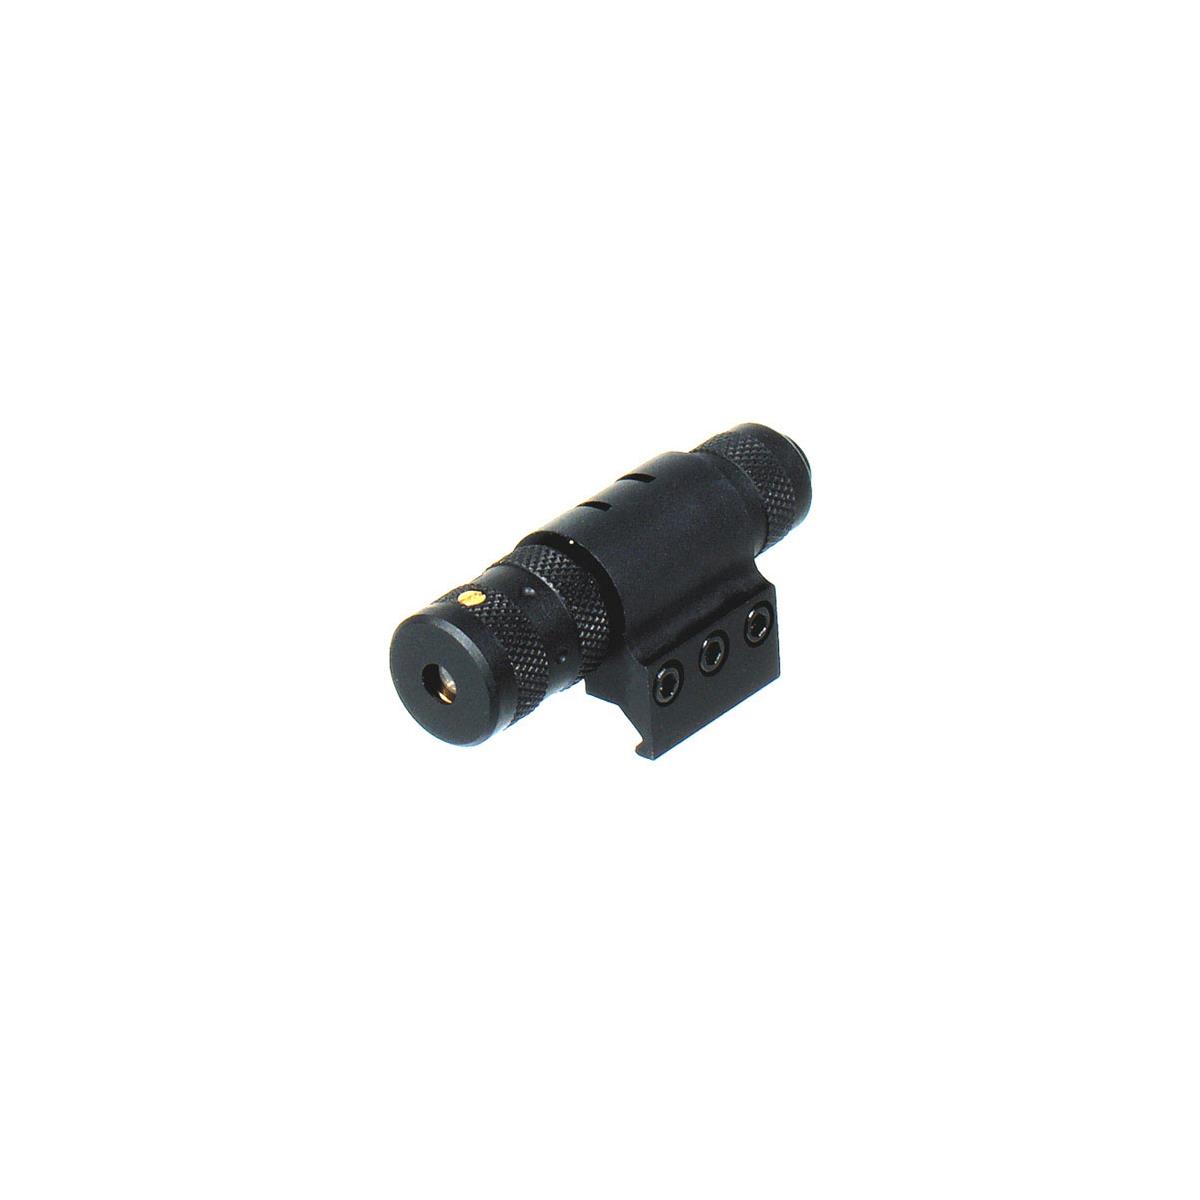 Image of UTG Leapers UTG Combat Tactical W/E Adjustable Red Laser Sight with Weaver Ring